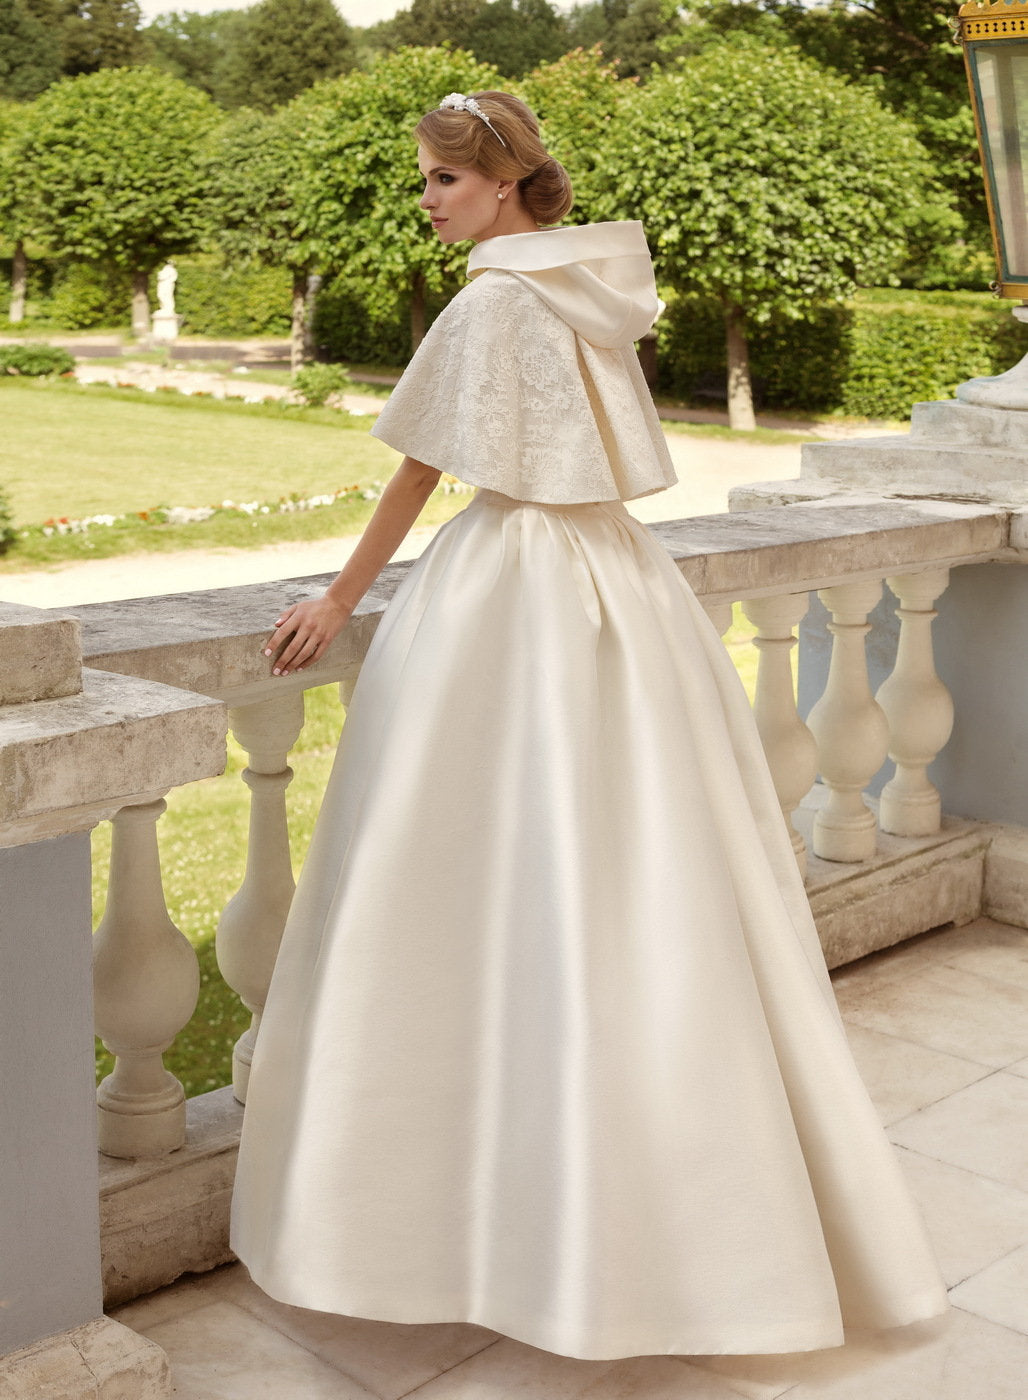 Simple Short Bridal Wedding Bolero Cape Lined with Satin with Thick Mikado Hood